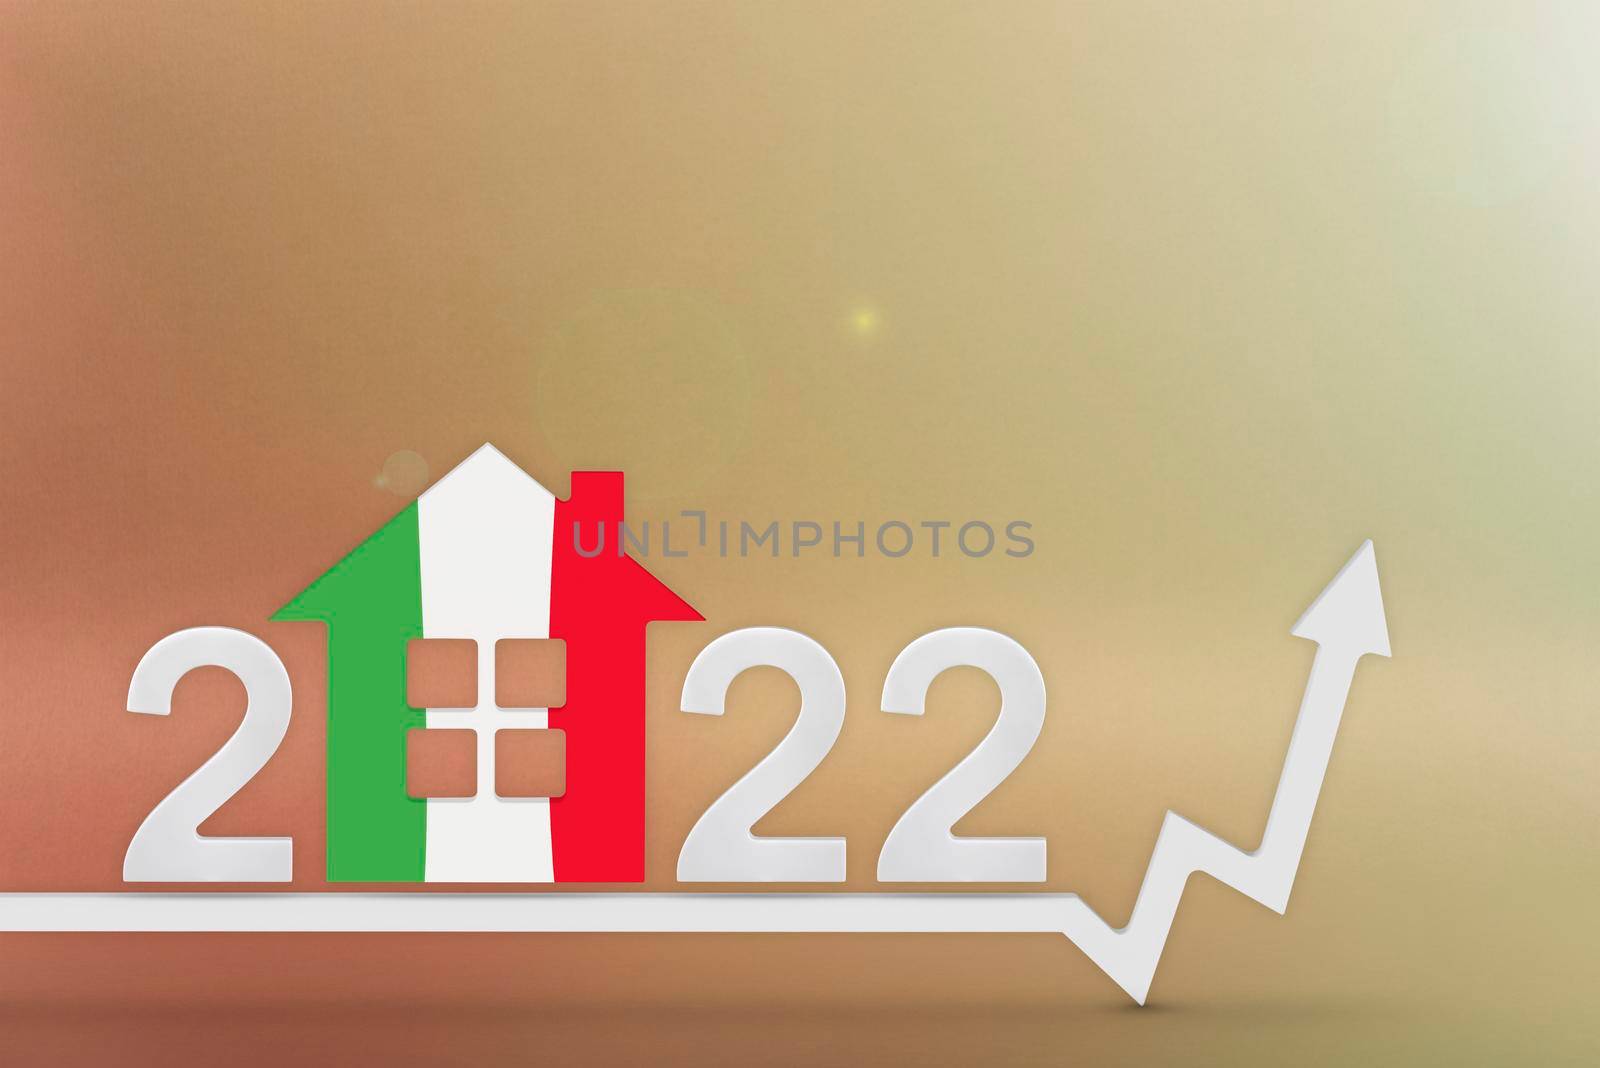 The cost of real estate in Italia in 2022. Rising cost of construction, insurance, rent in Italia. 3d House model painted in flag colors, up arrow on yellow background by SERSOL